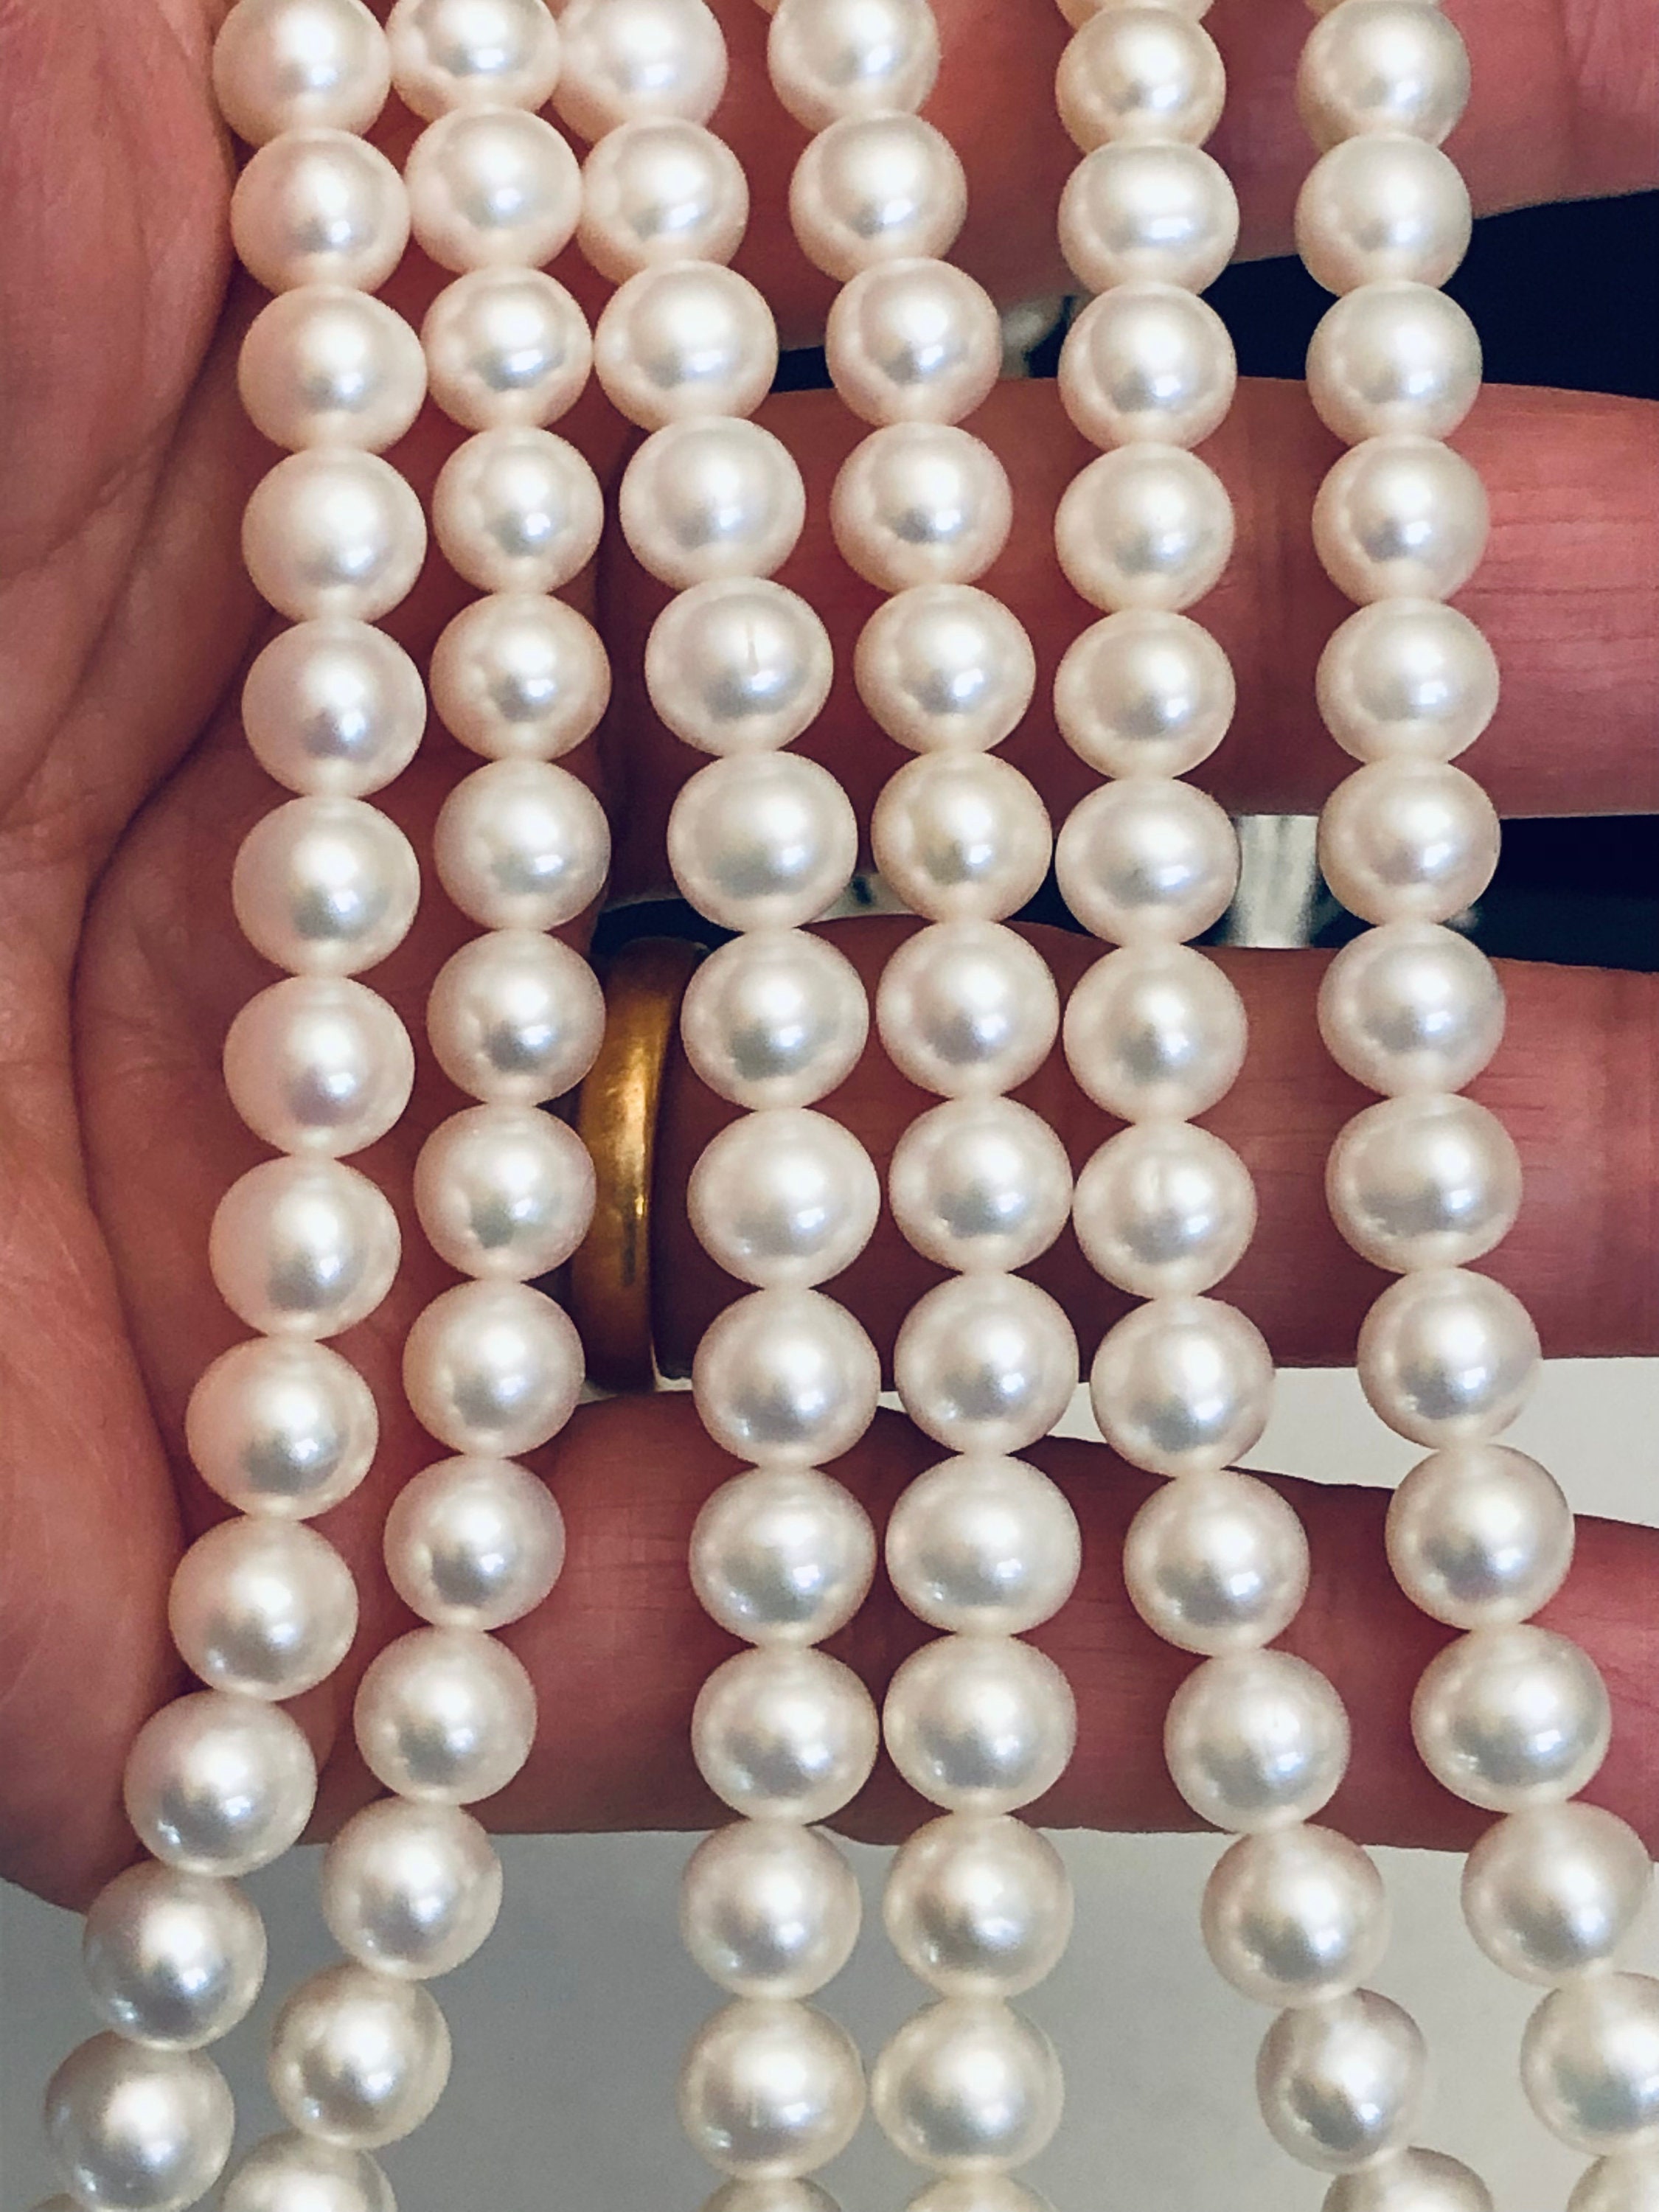 Buy Zhe Ying Genuine Freshwater Pearl Beads for Jewelry Making